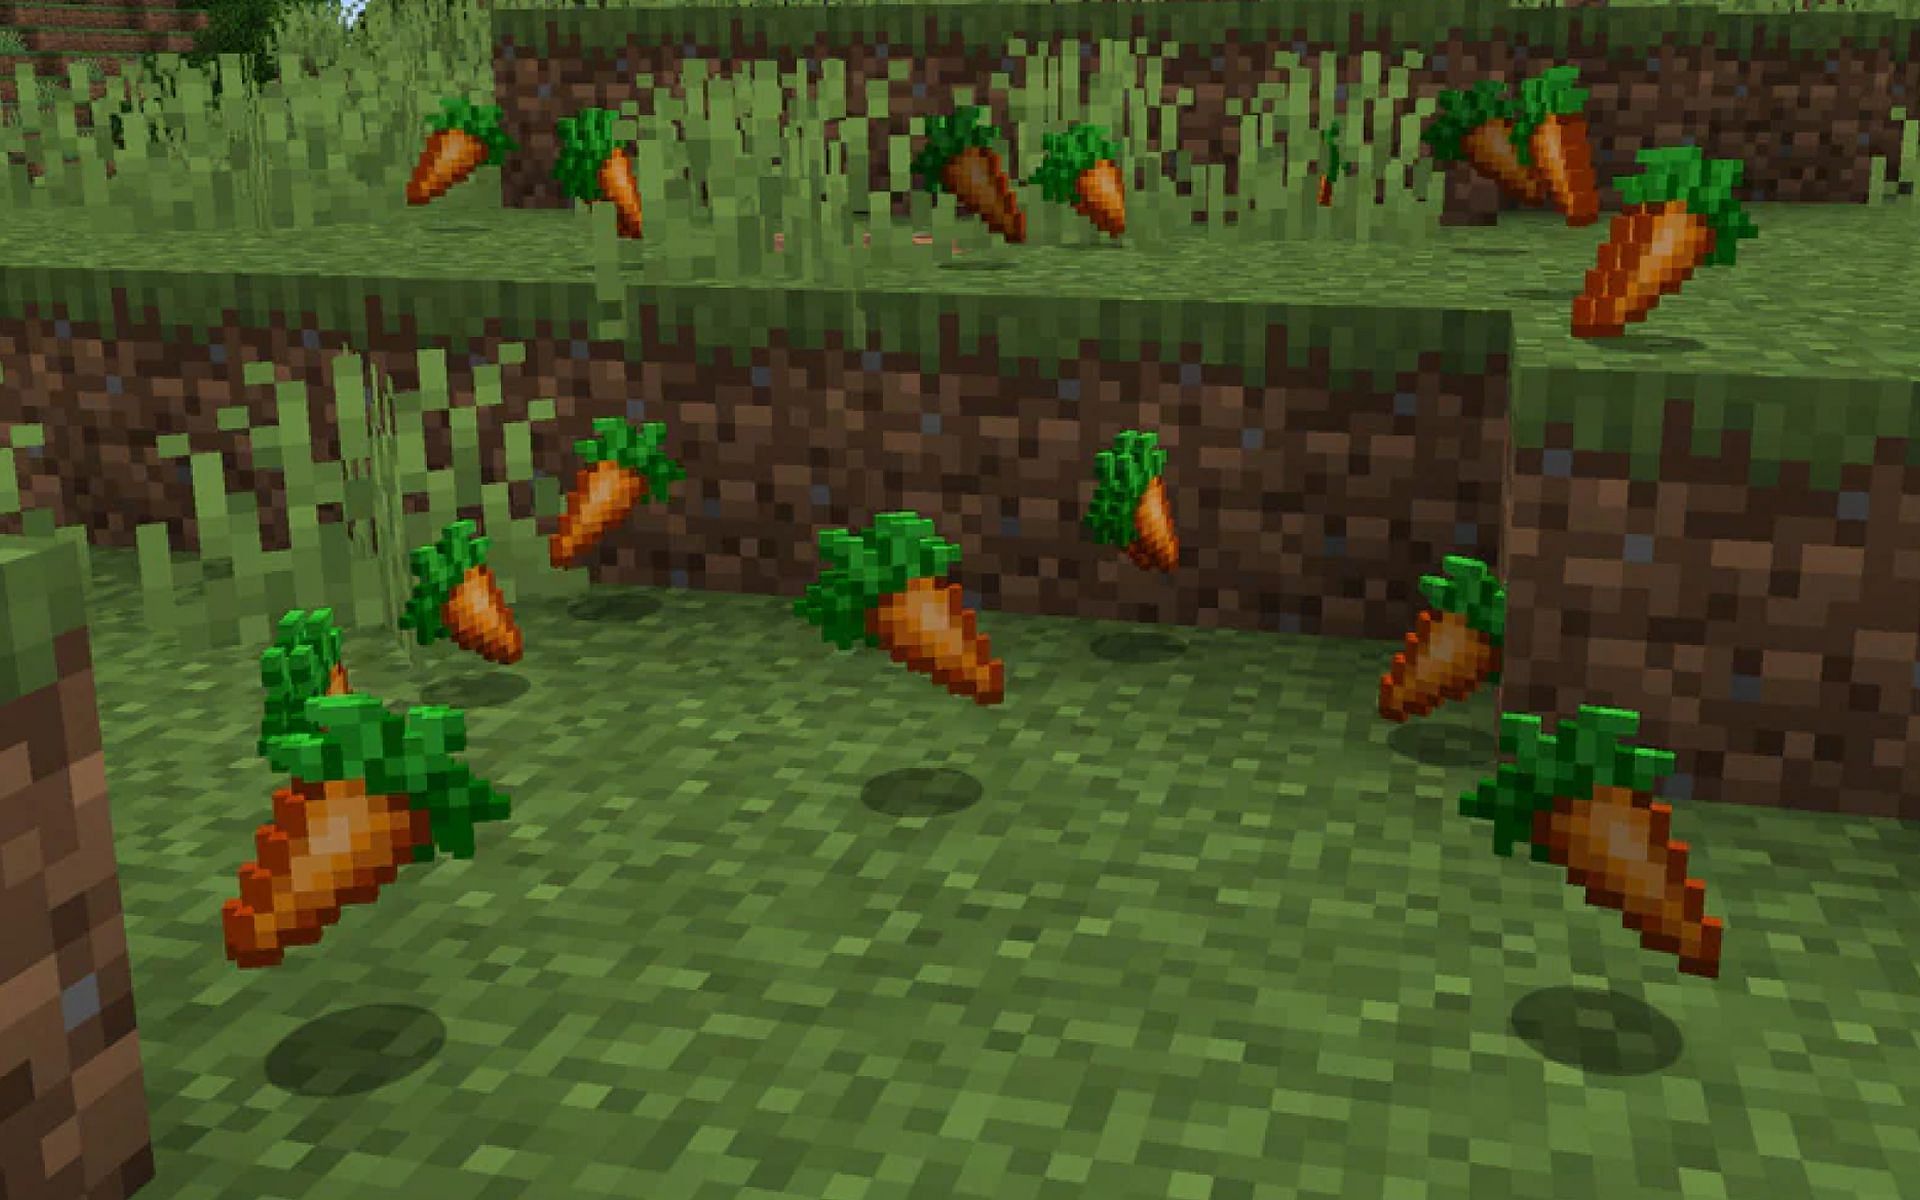 Pigs and rabbits can both be attracted by carrots in-game. (Image via Minecraft)